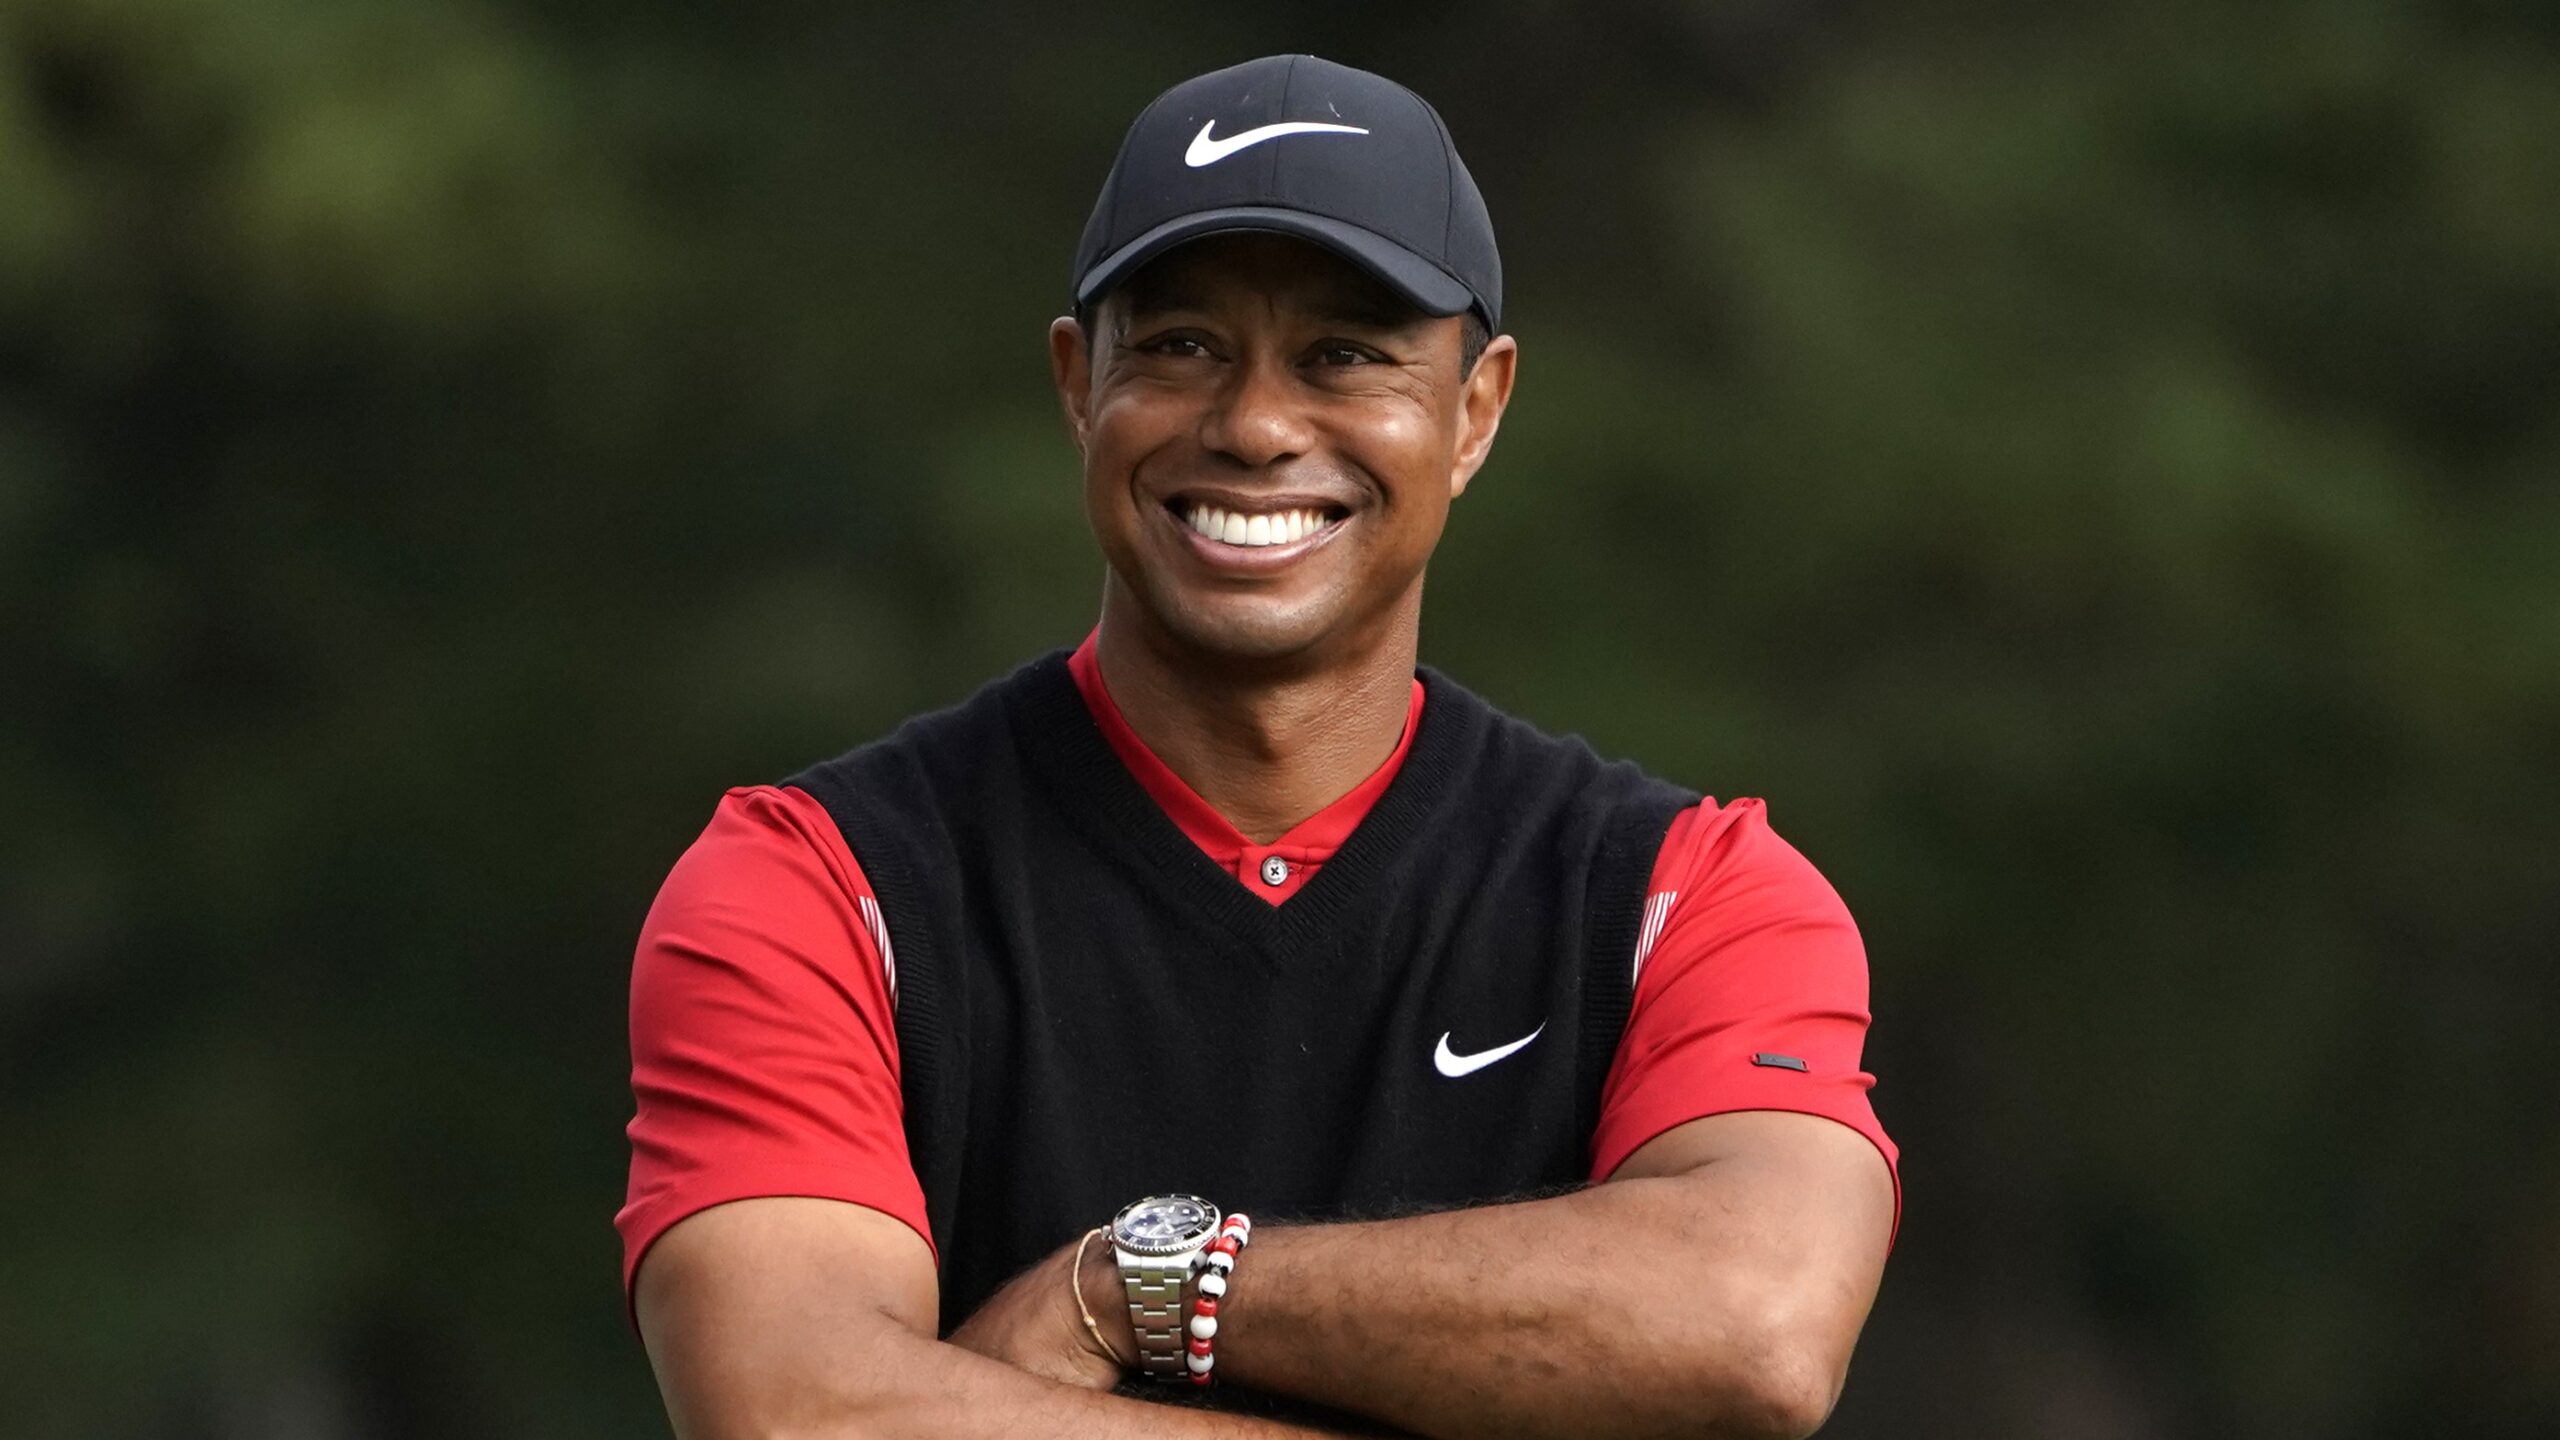   Tiger Woods (Tiger) 30 Richest Celebrities in the world